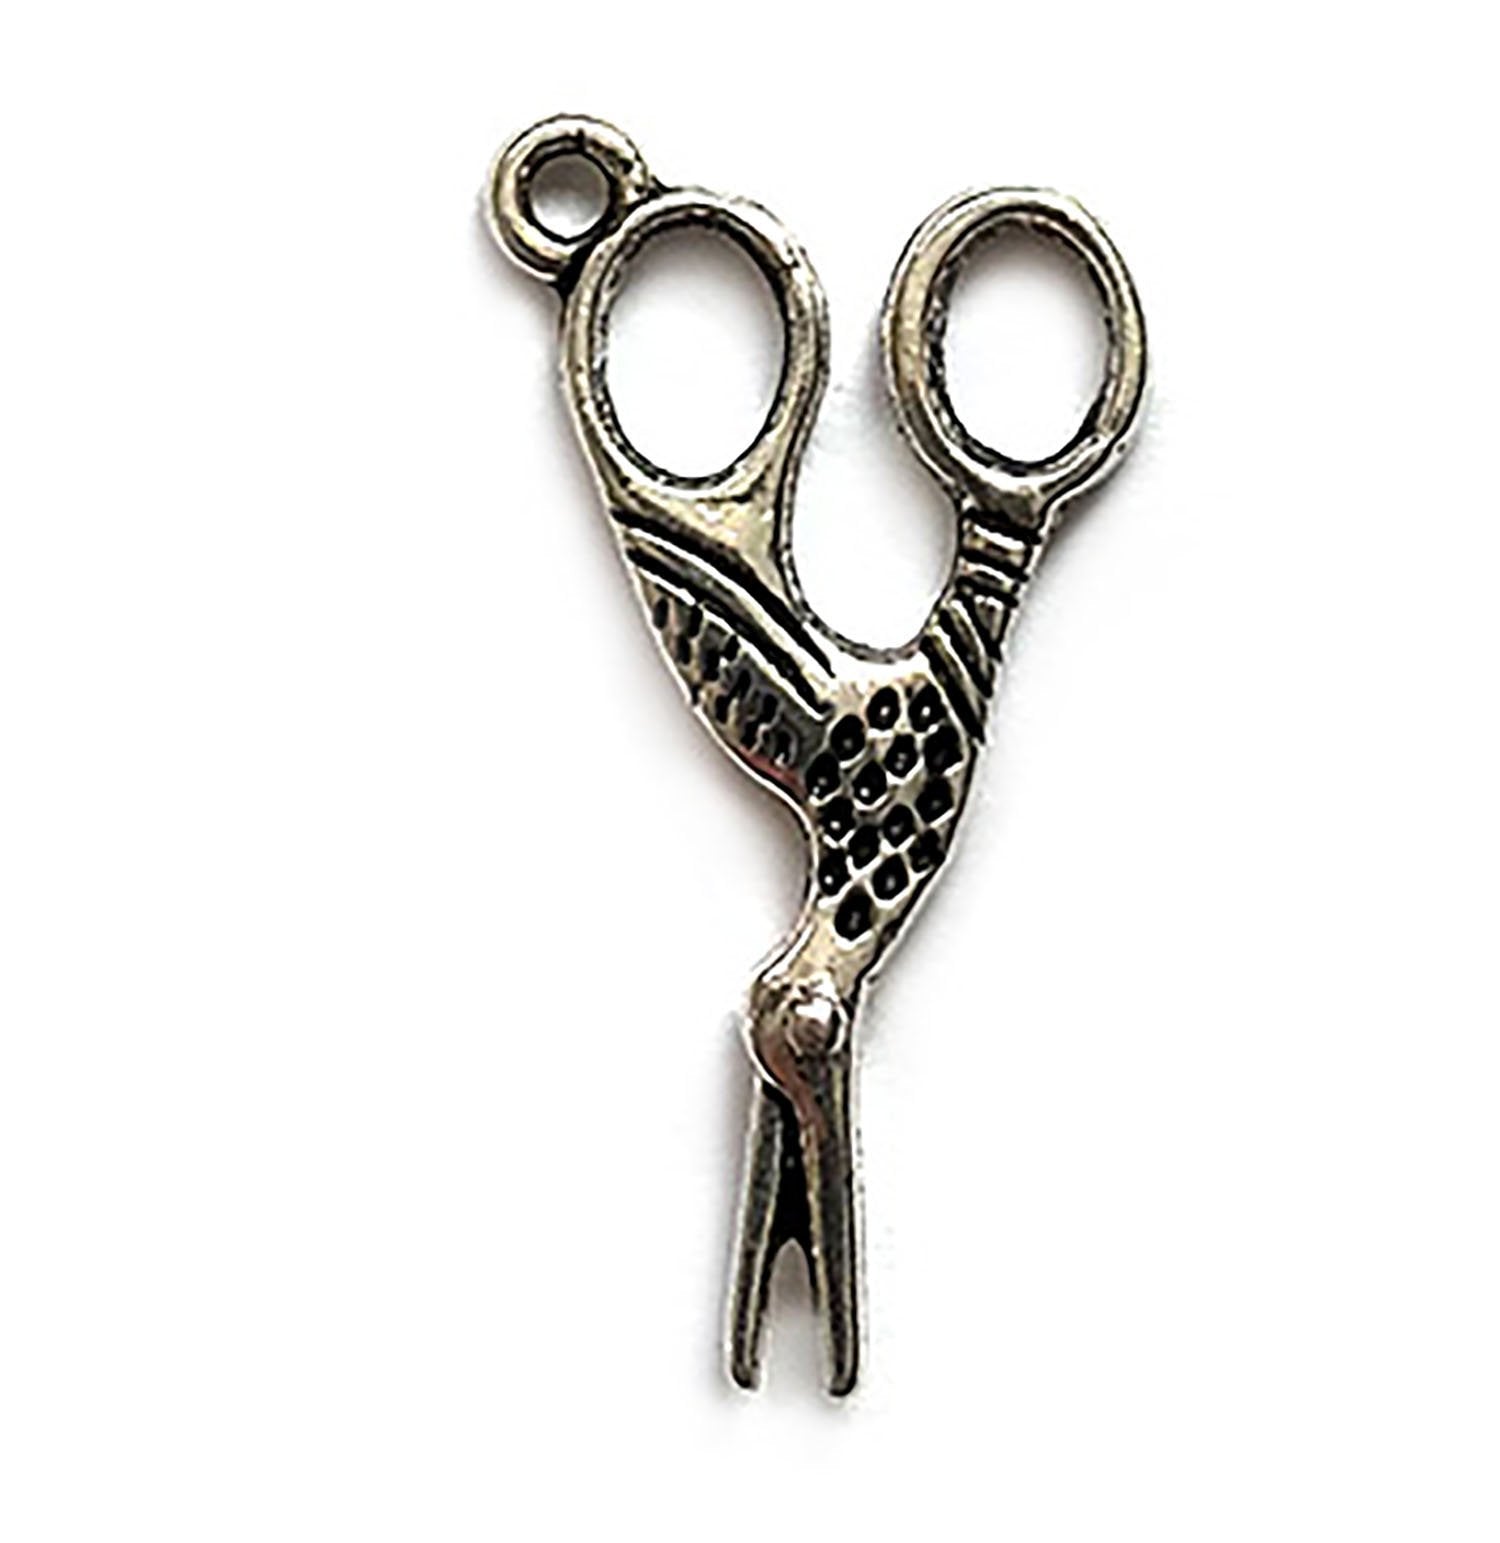 Scissors Charm - Buttons Galore and More